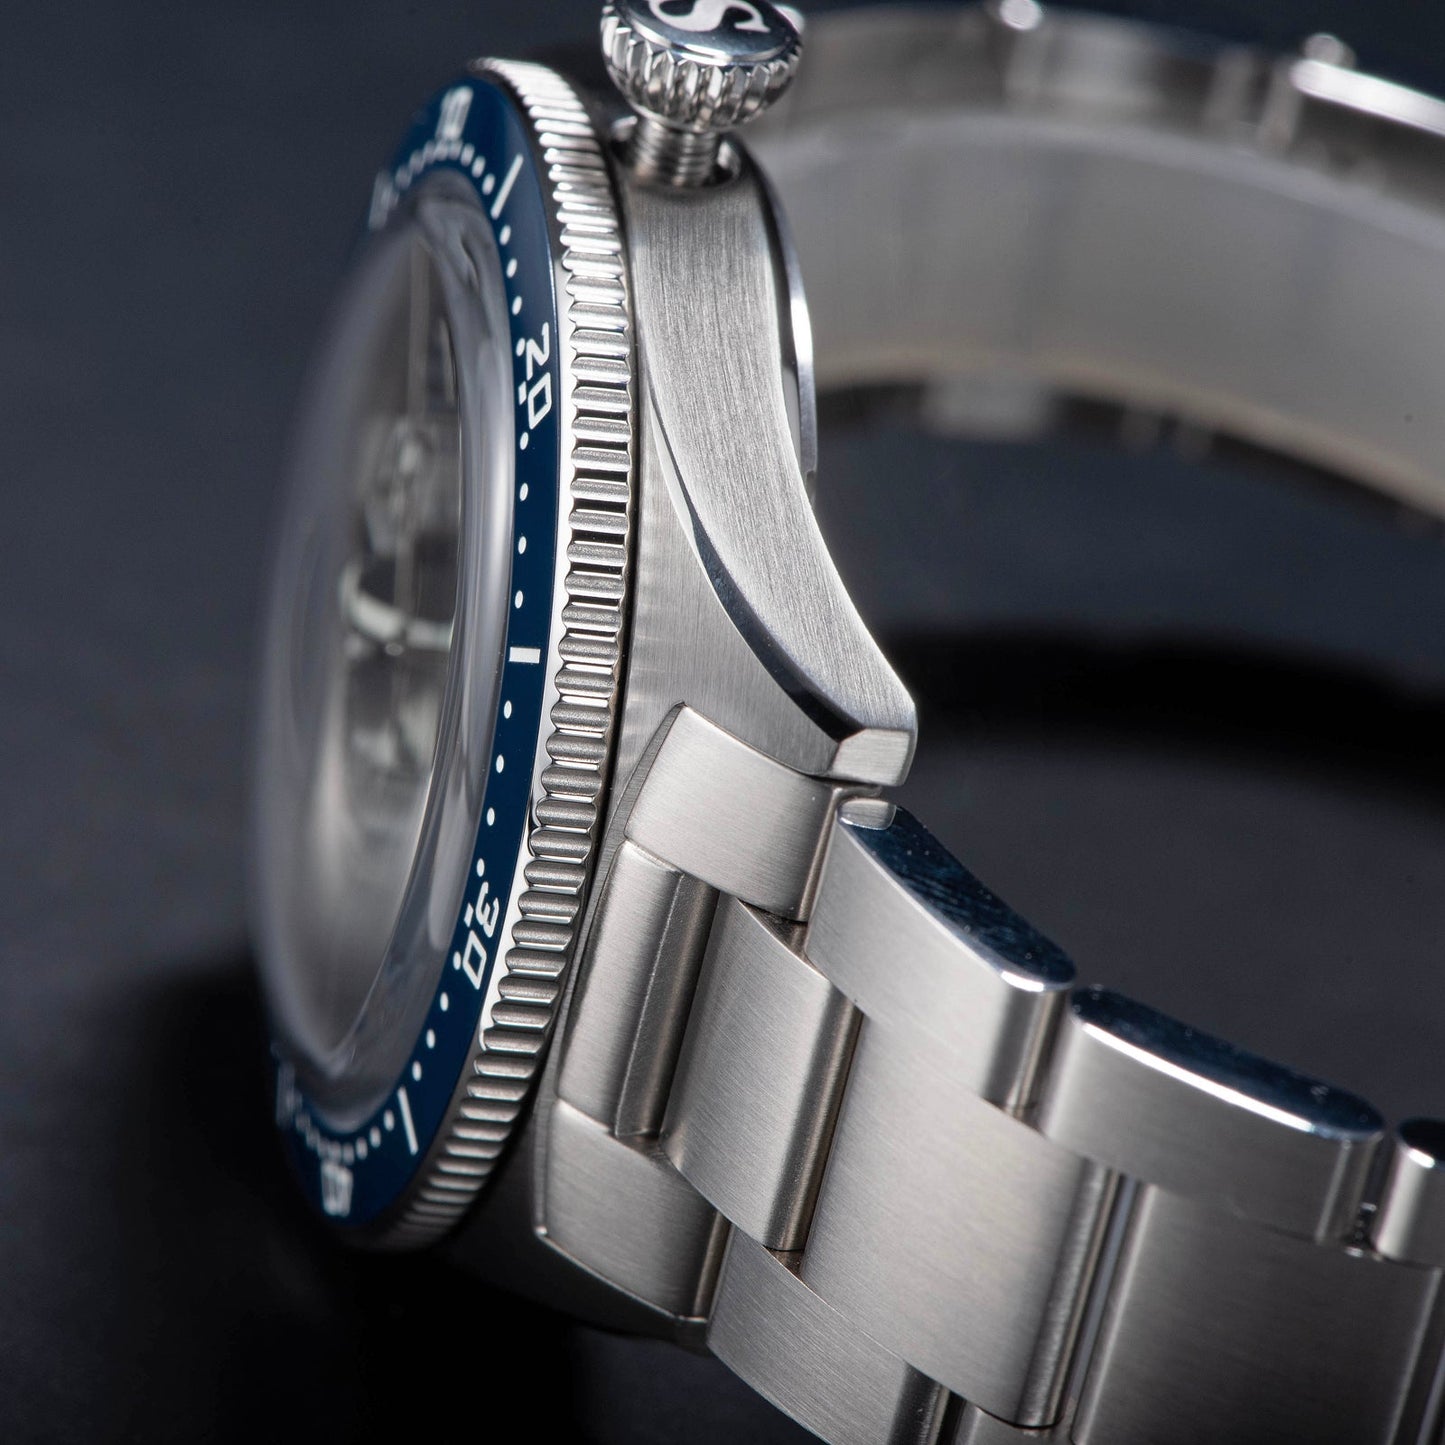 Seestern 435 Professional Diver Stainless-Steel Bracelet (Seagull ST2130 movement)